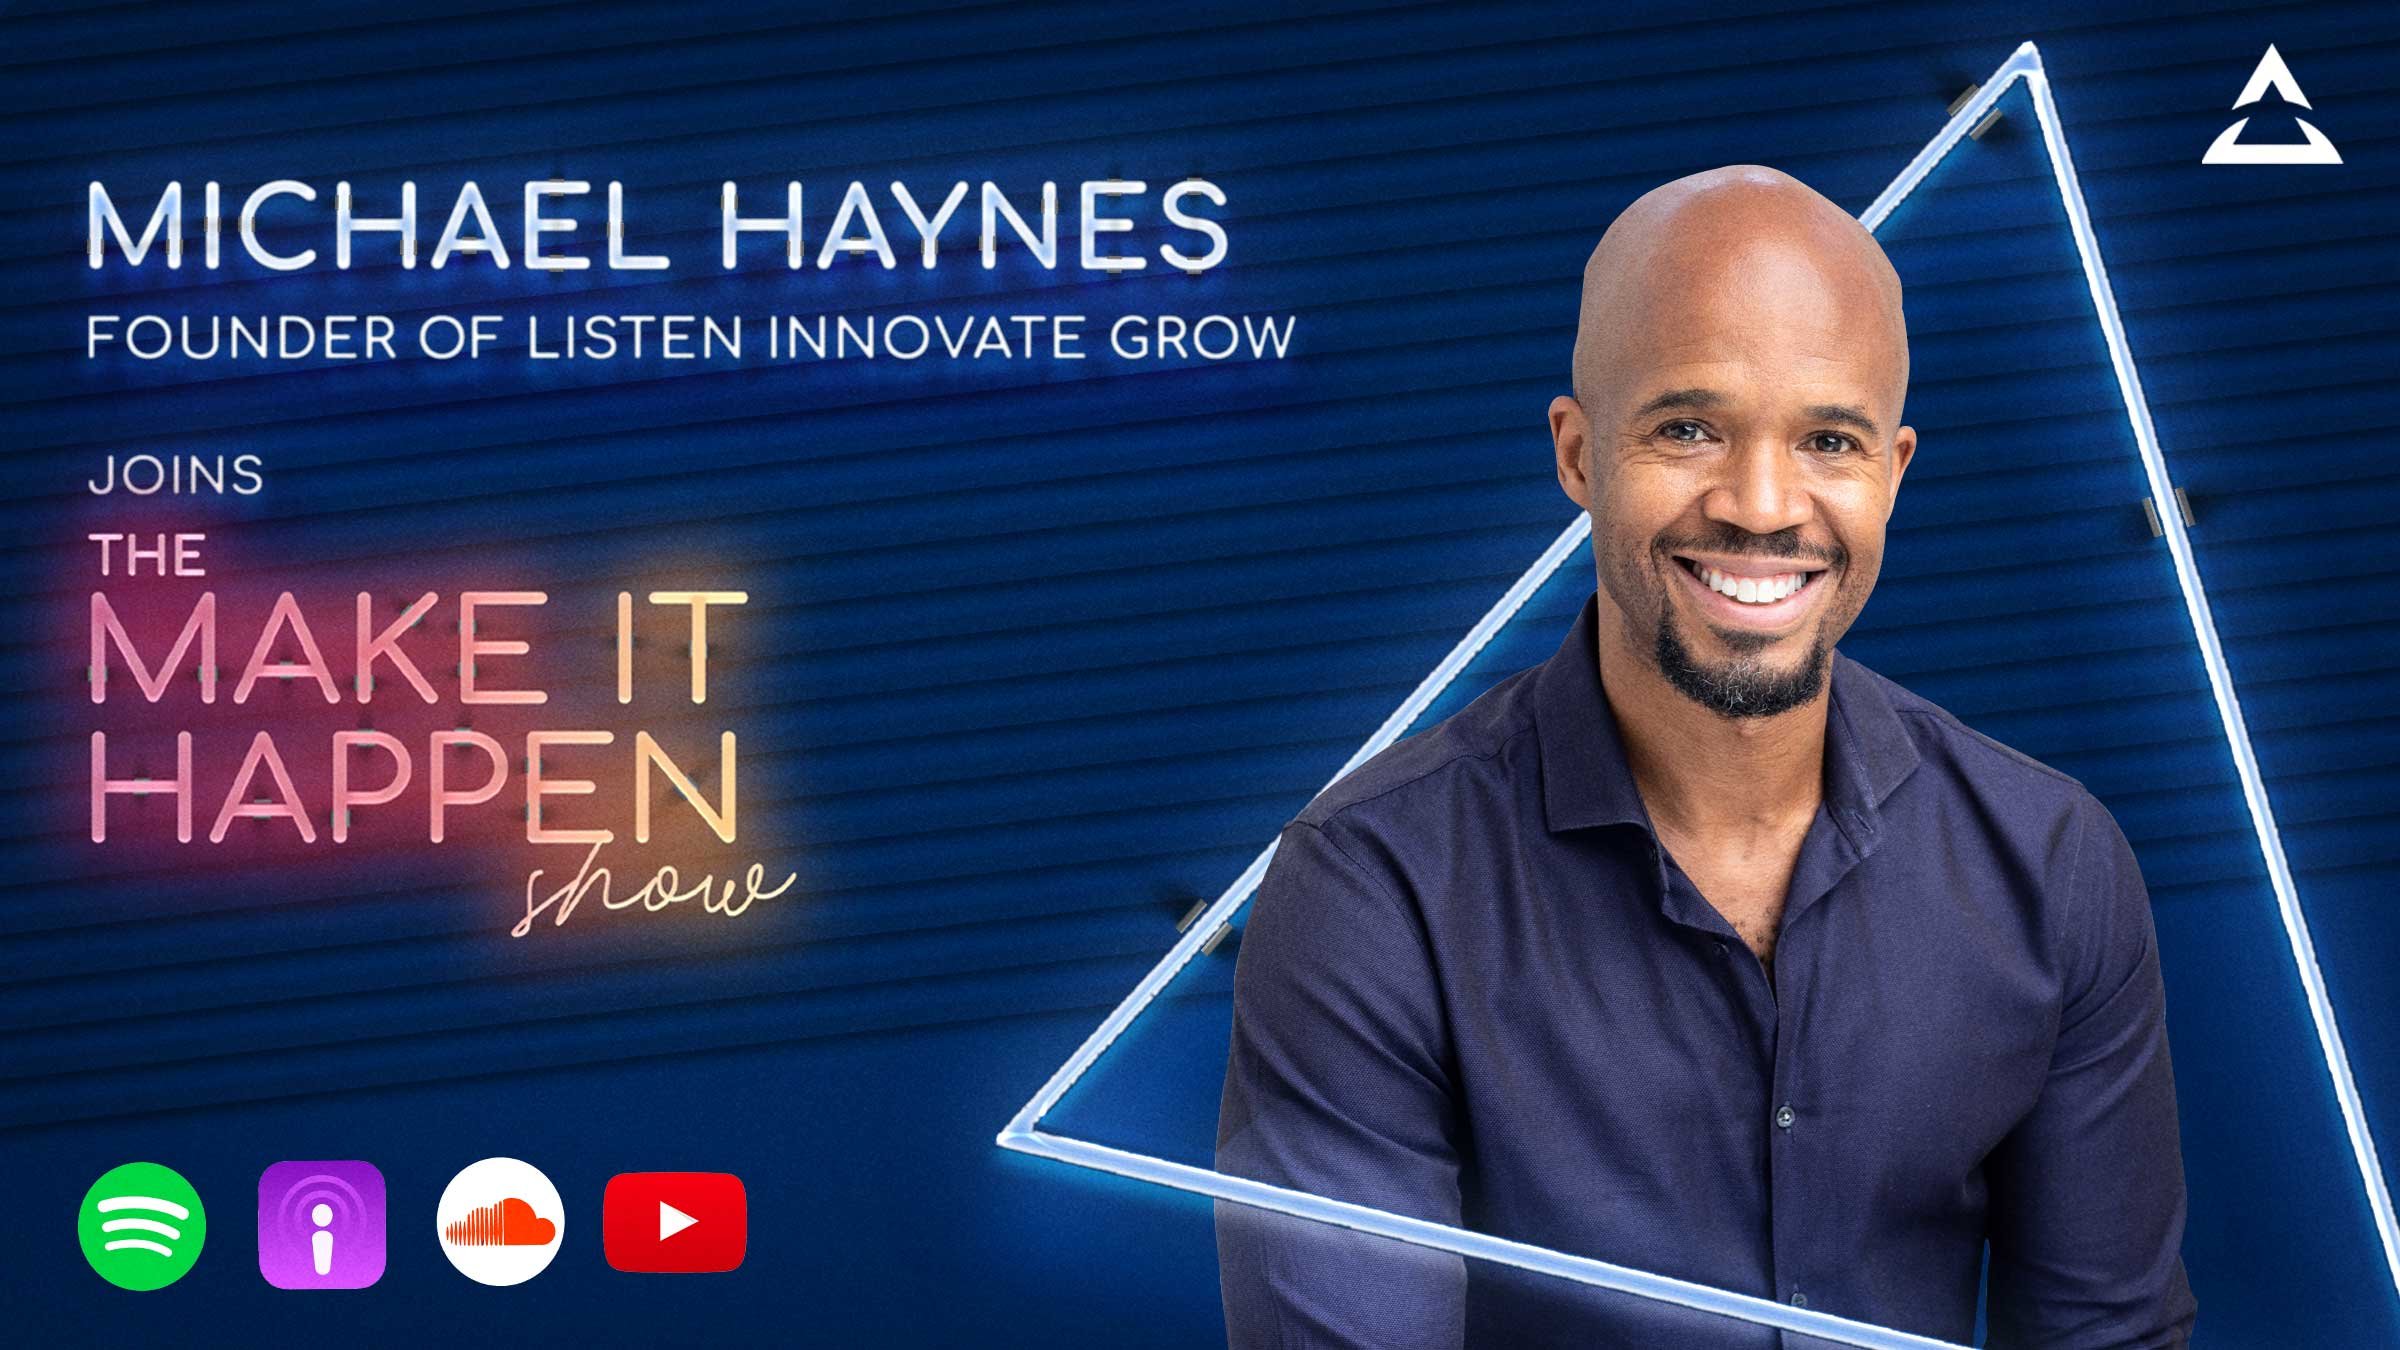 Michael Haynes, Founder of Listen Innovate Grow joins The Make It Happen Show